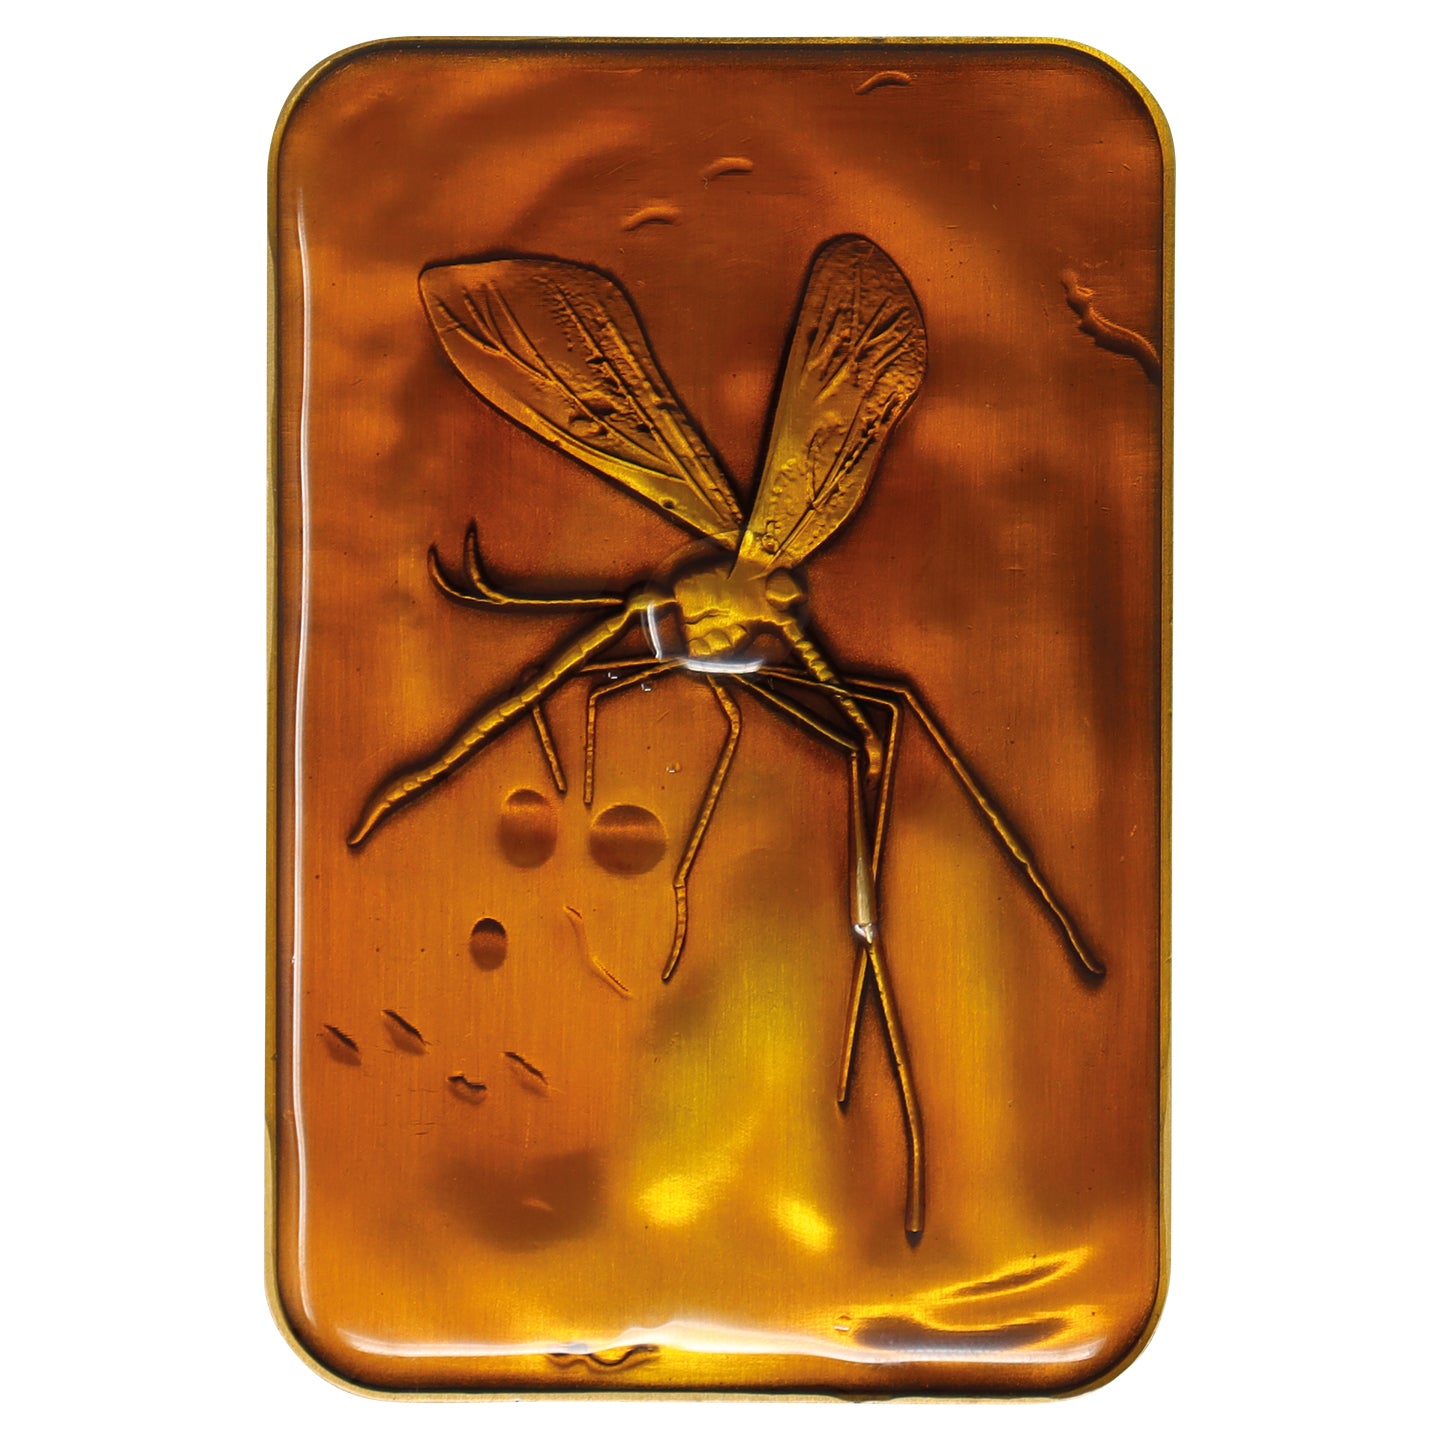 Jurassic Park Limited Edition Mosquito in Amber Ingot